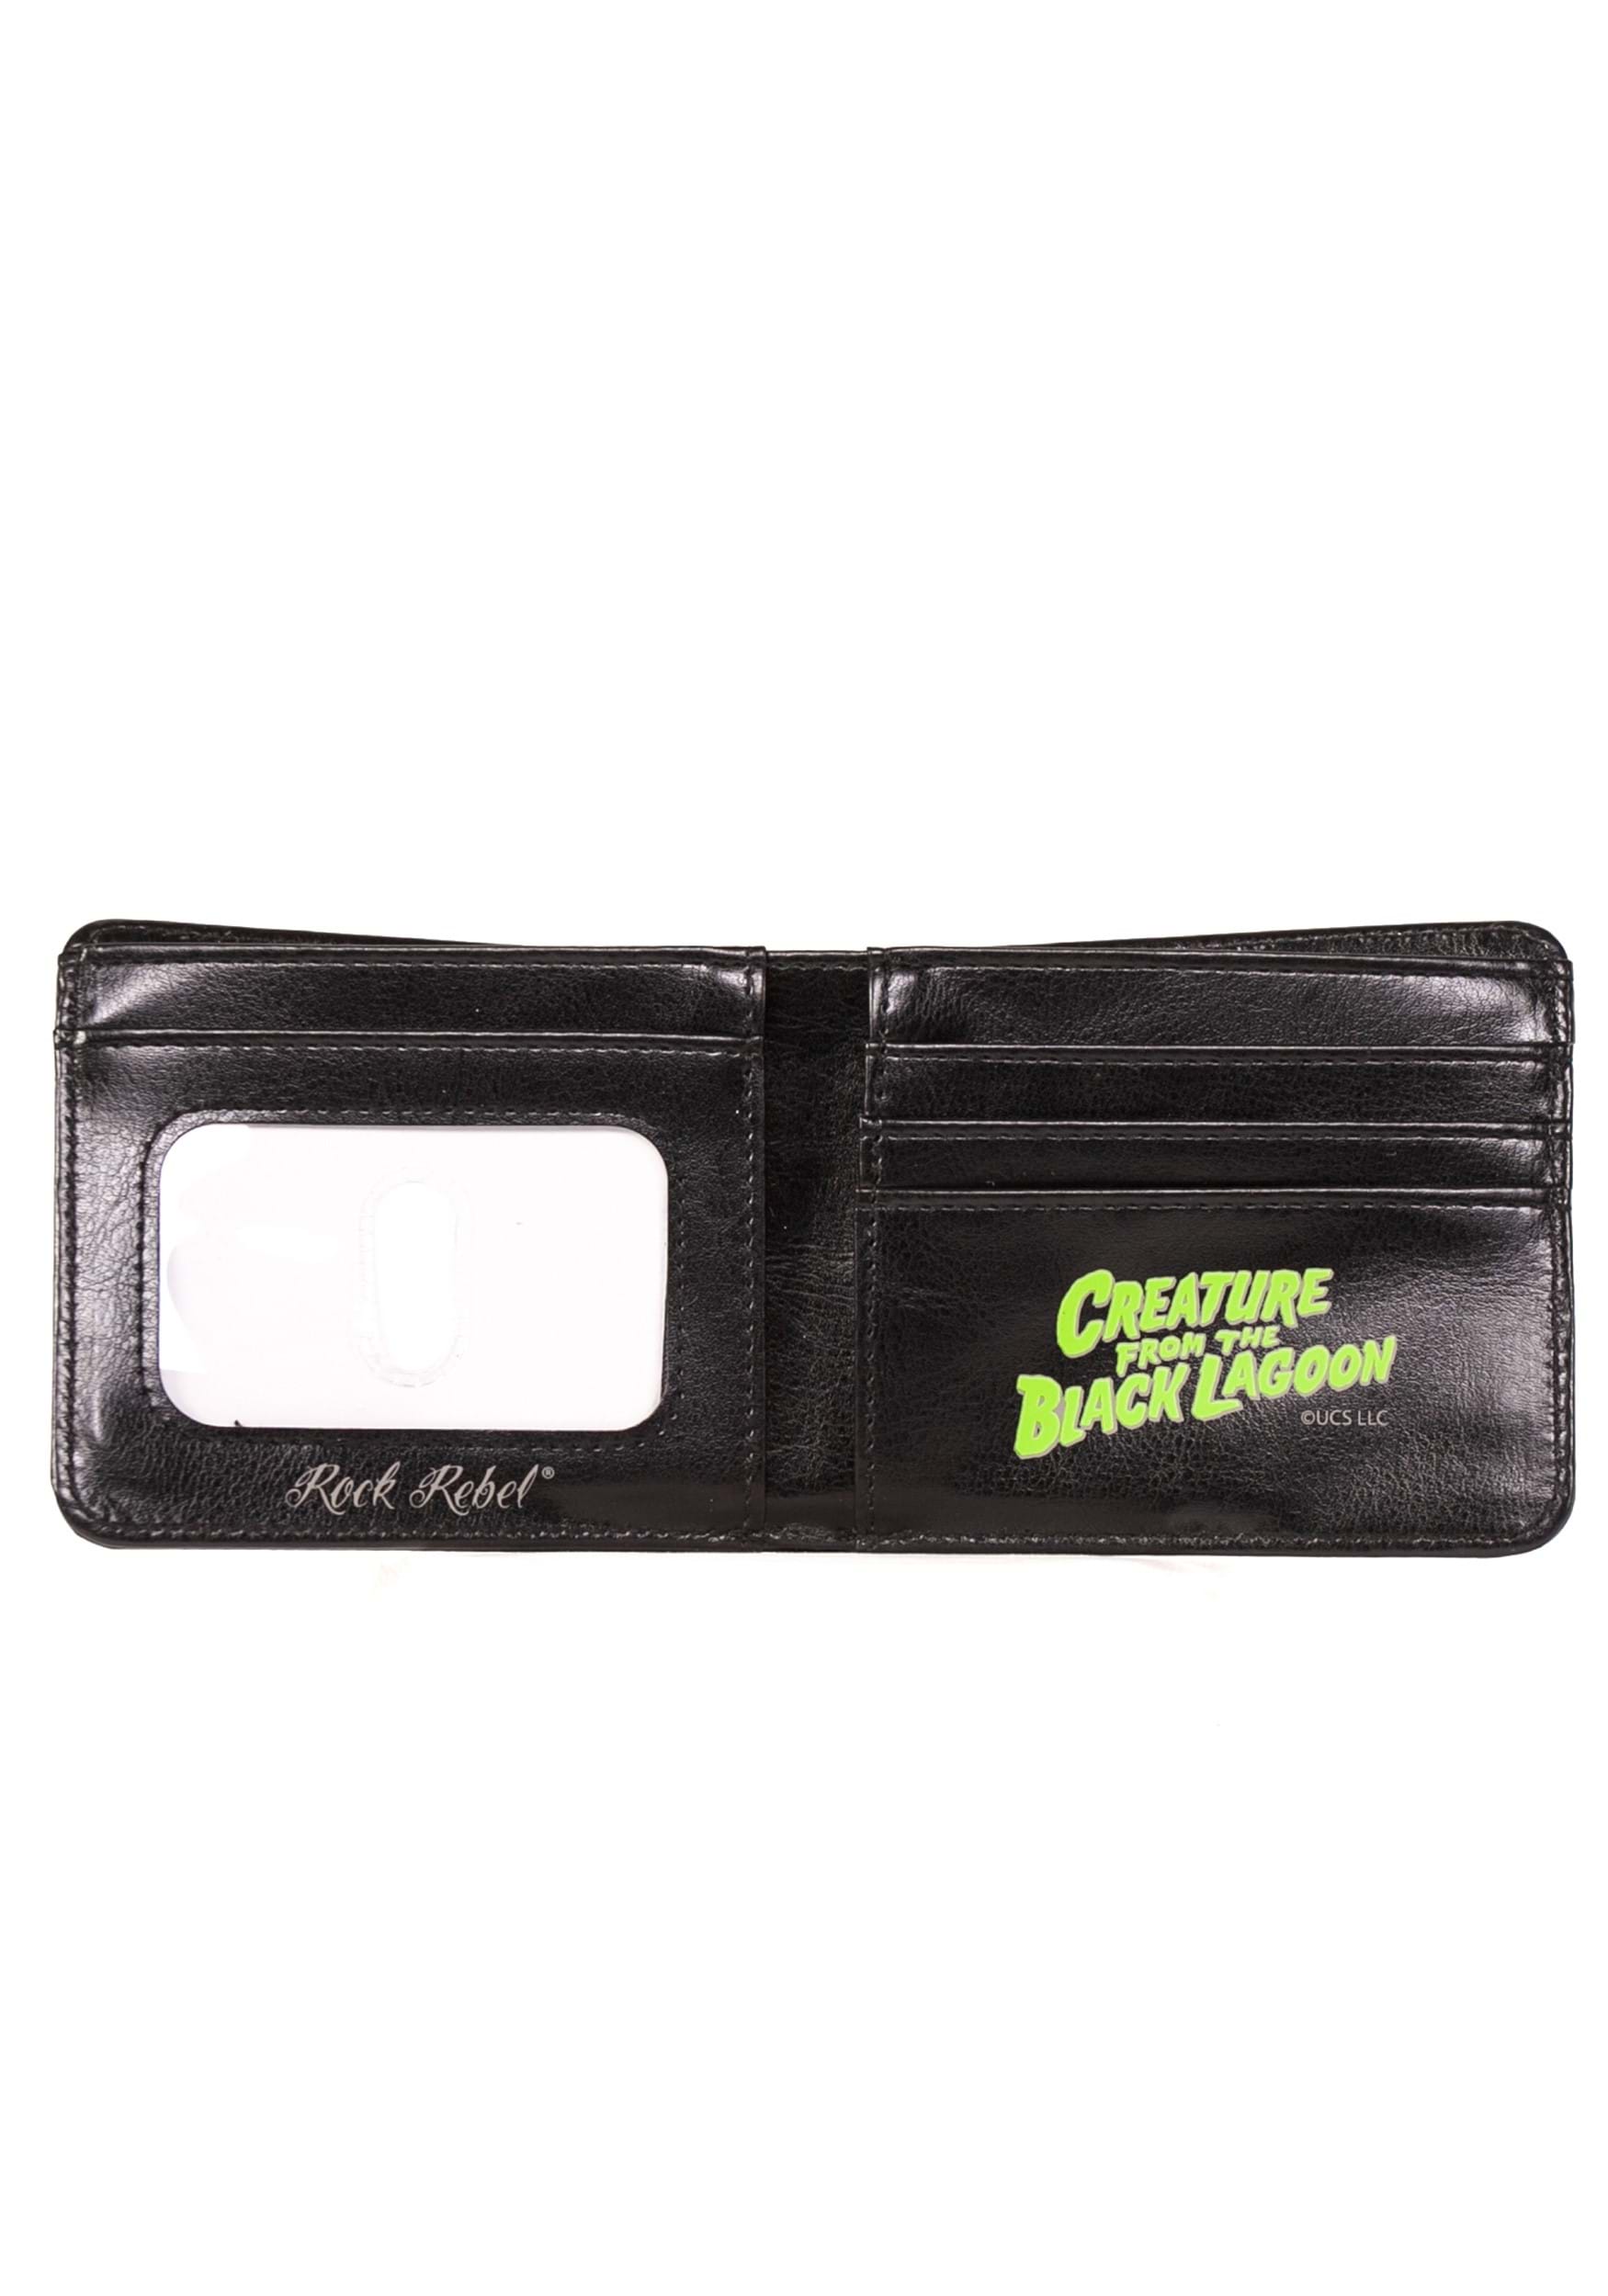 Creature From The Black Lagoon Wallet